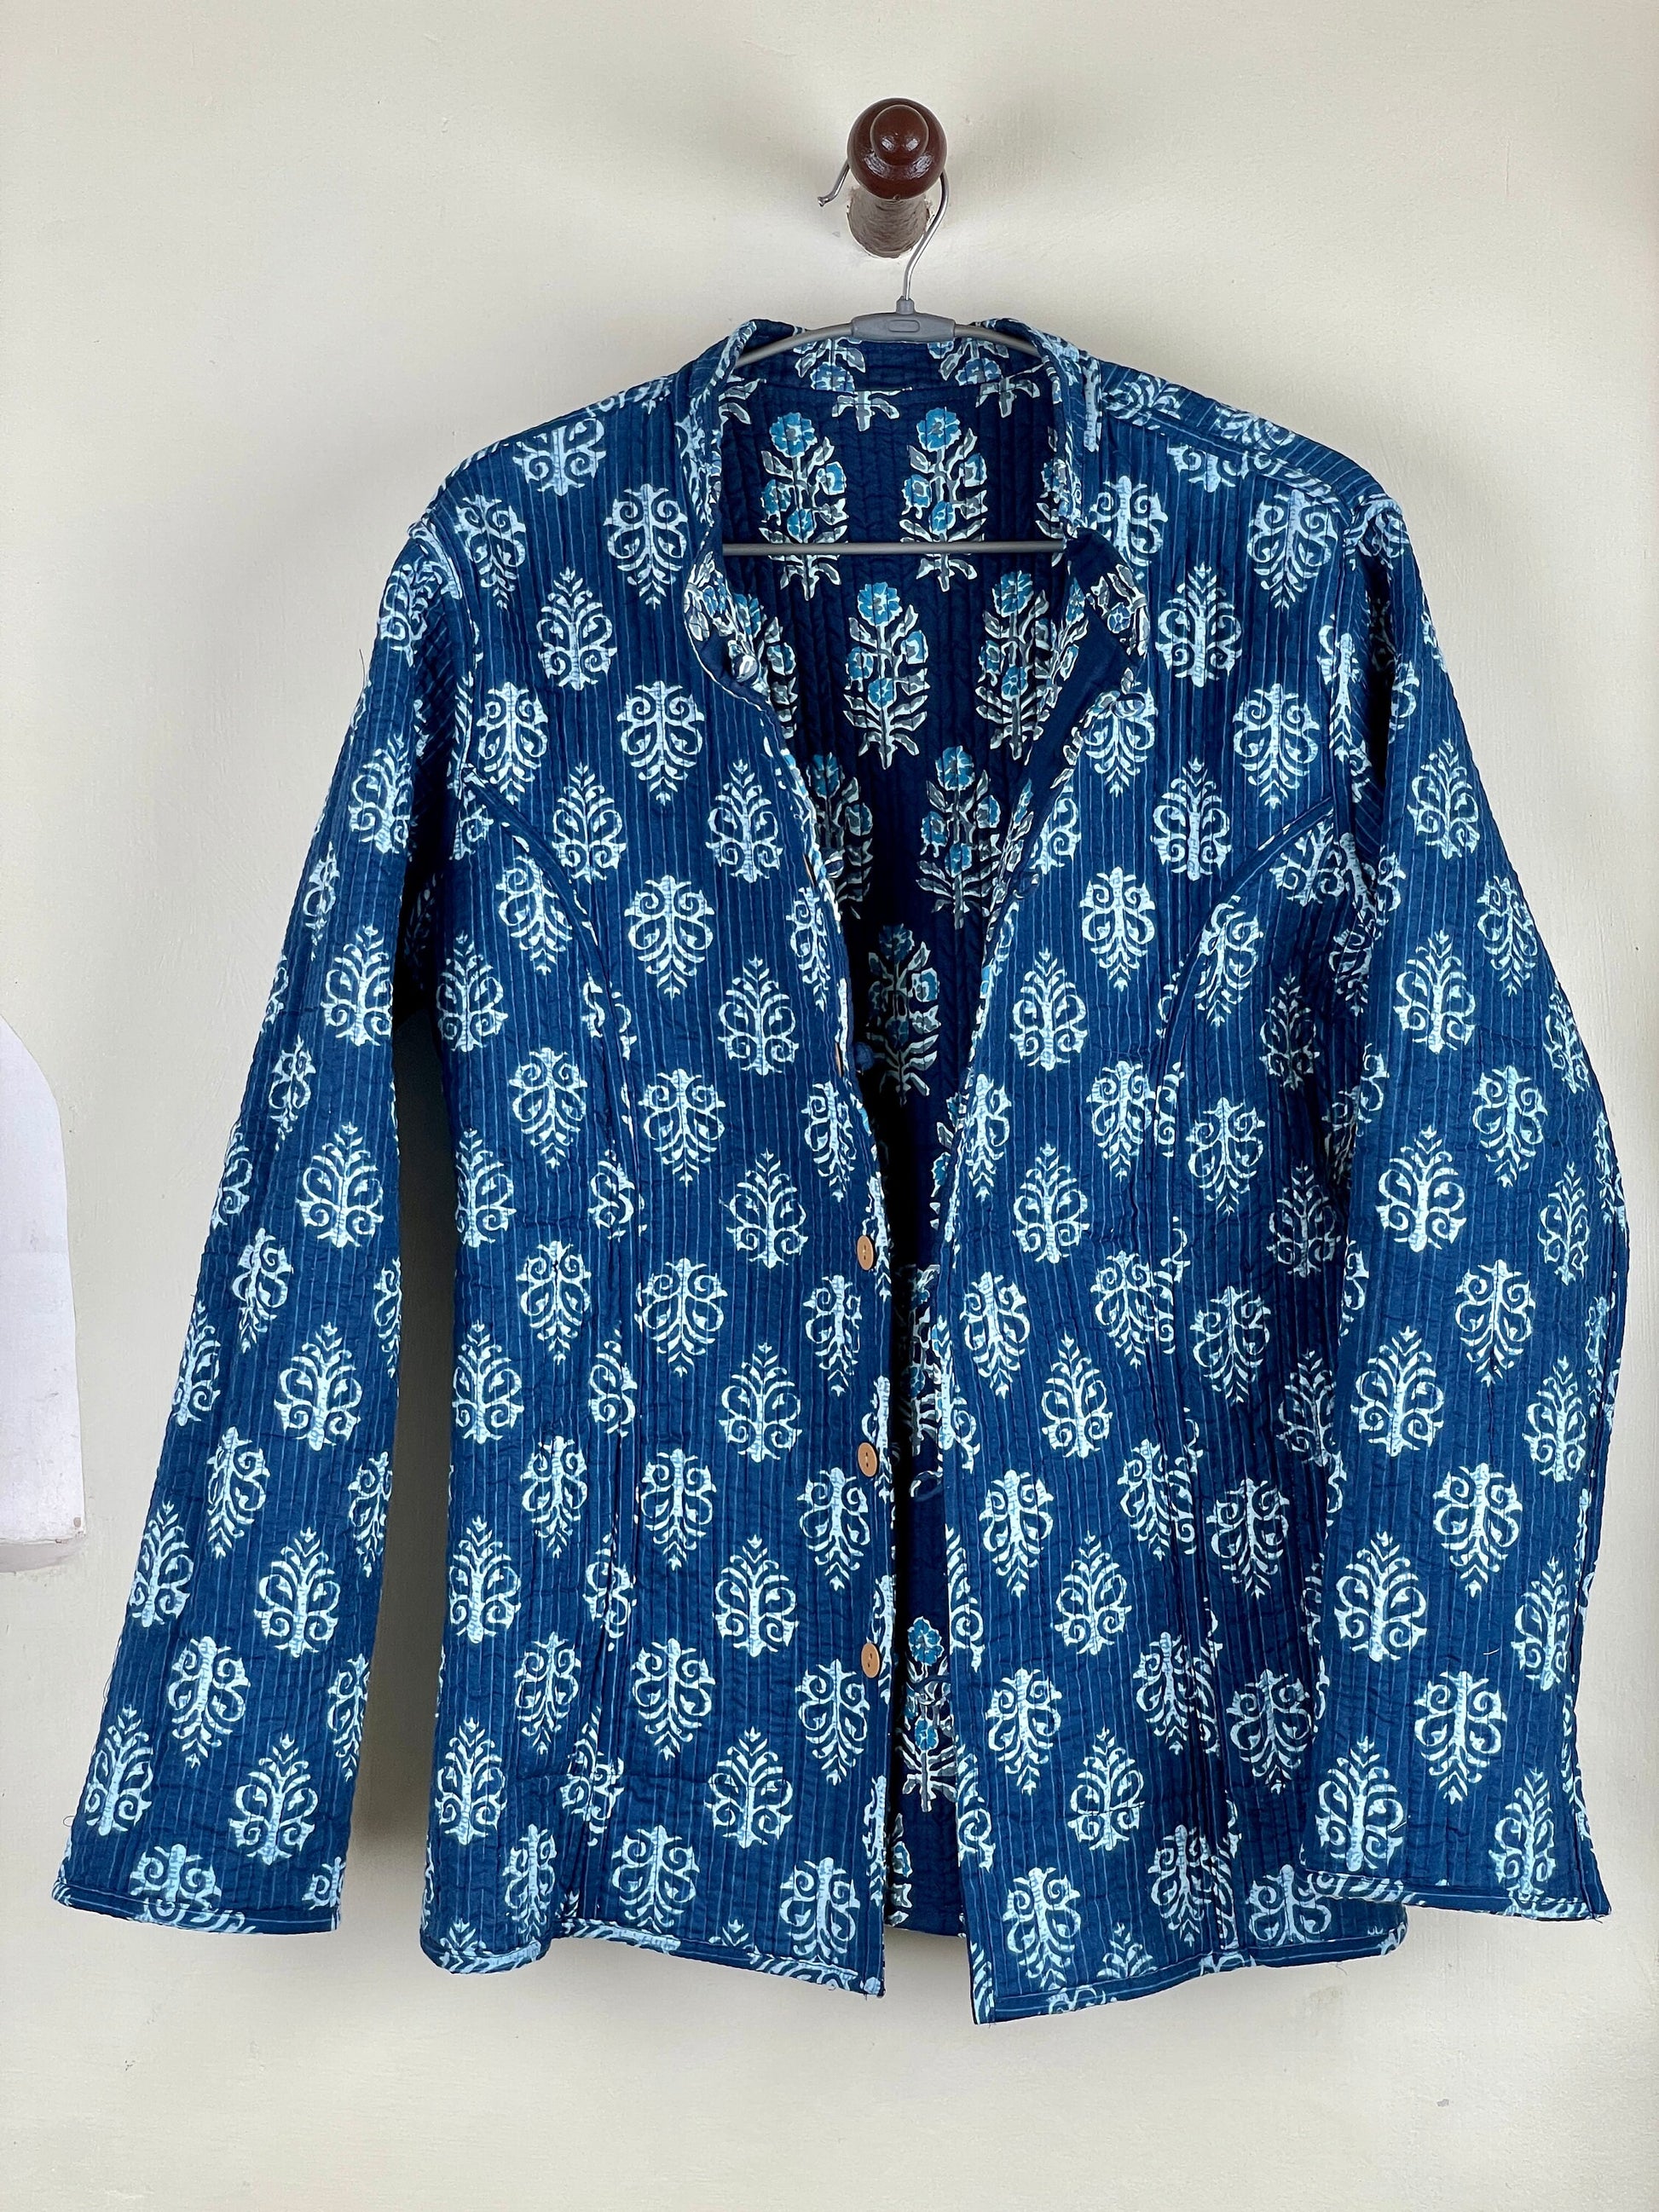 Indian Handmade Quilted Cotton Fabric Jacket Stylish Blue & White Floral Women's Coat, Reversible Waistcoat, Christmas Gift for Her